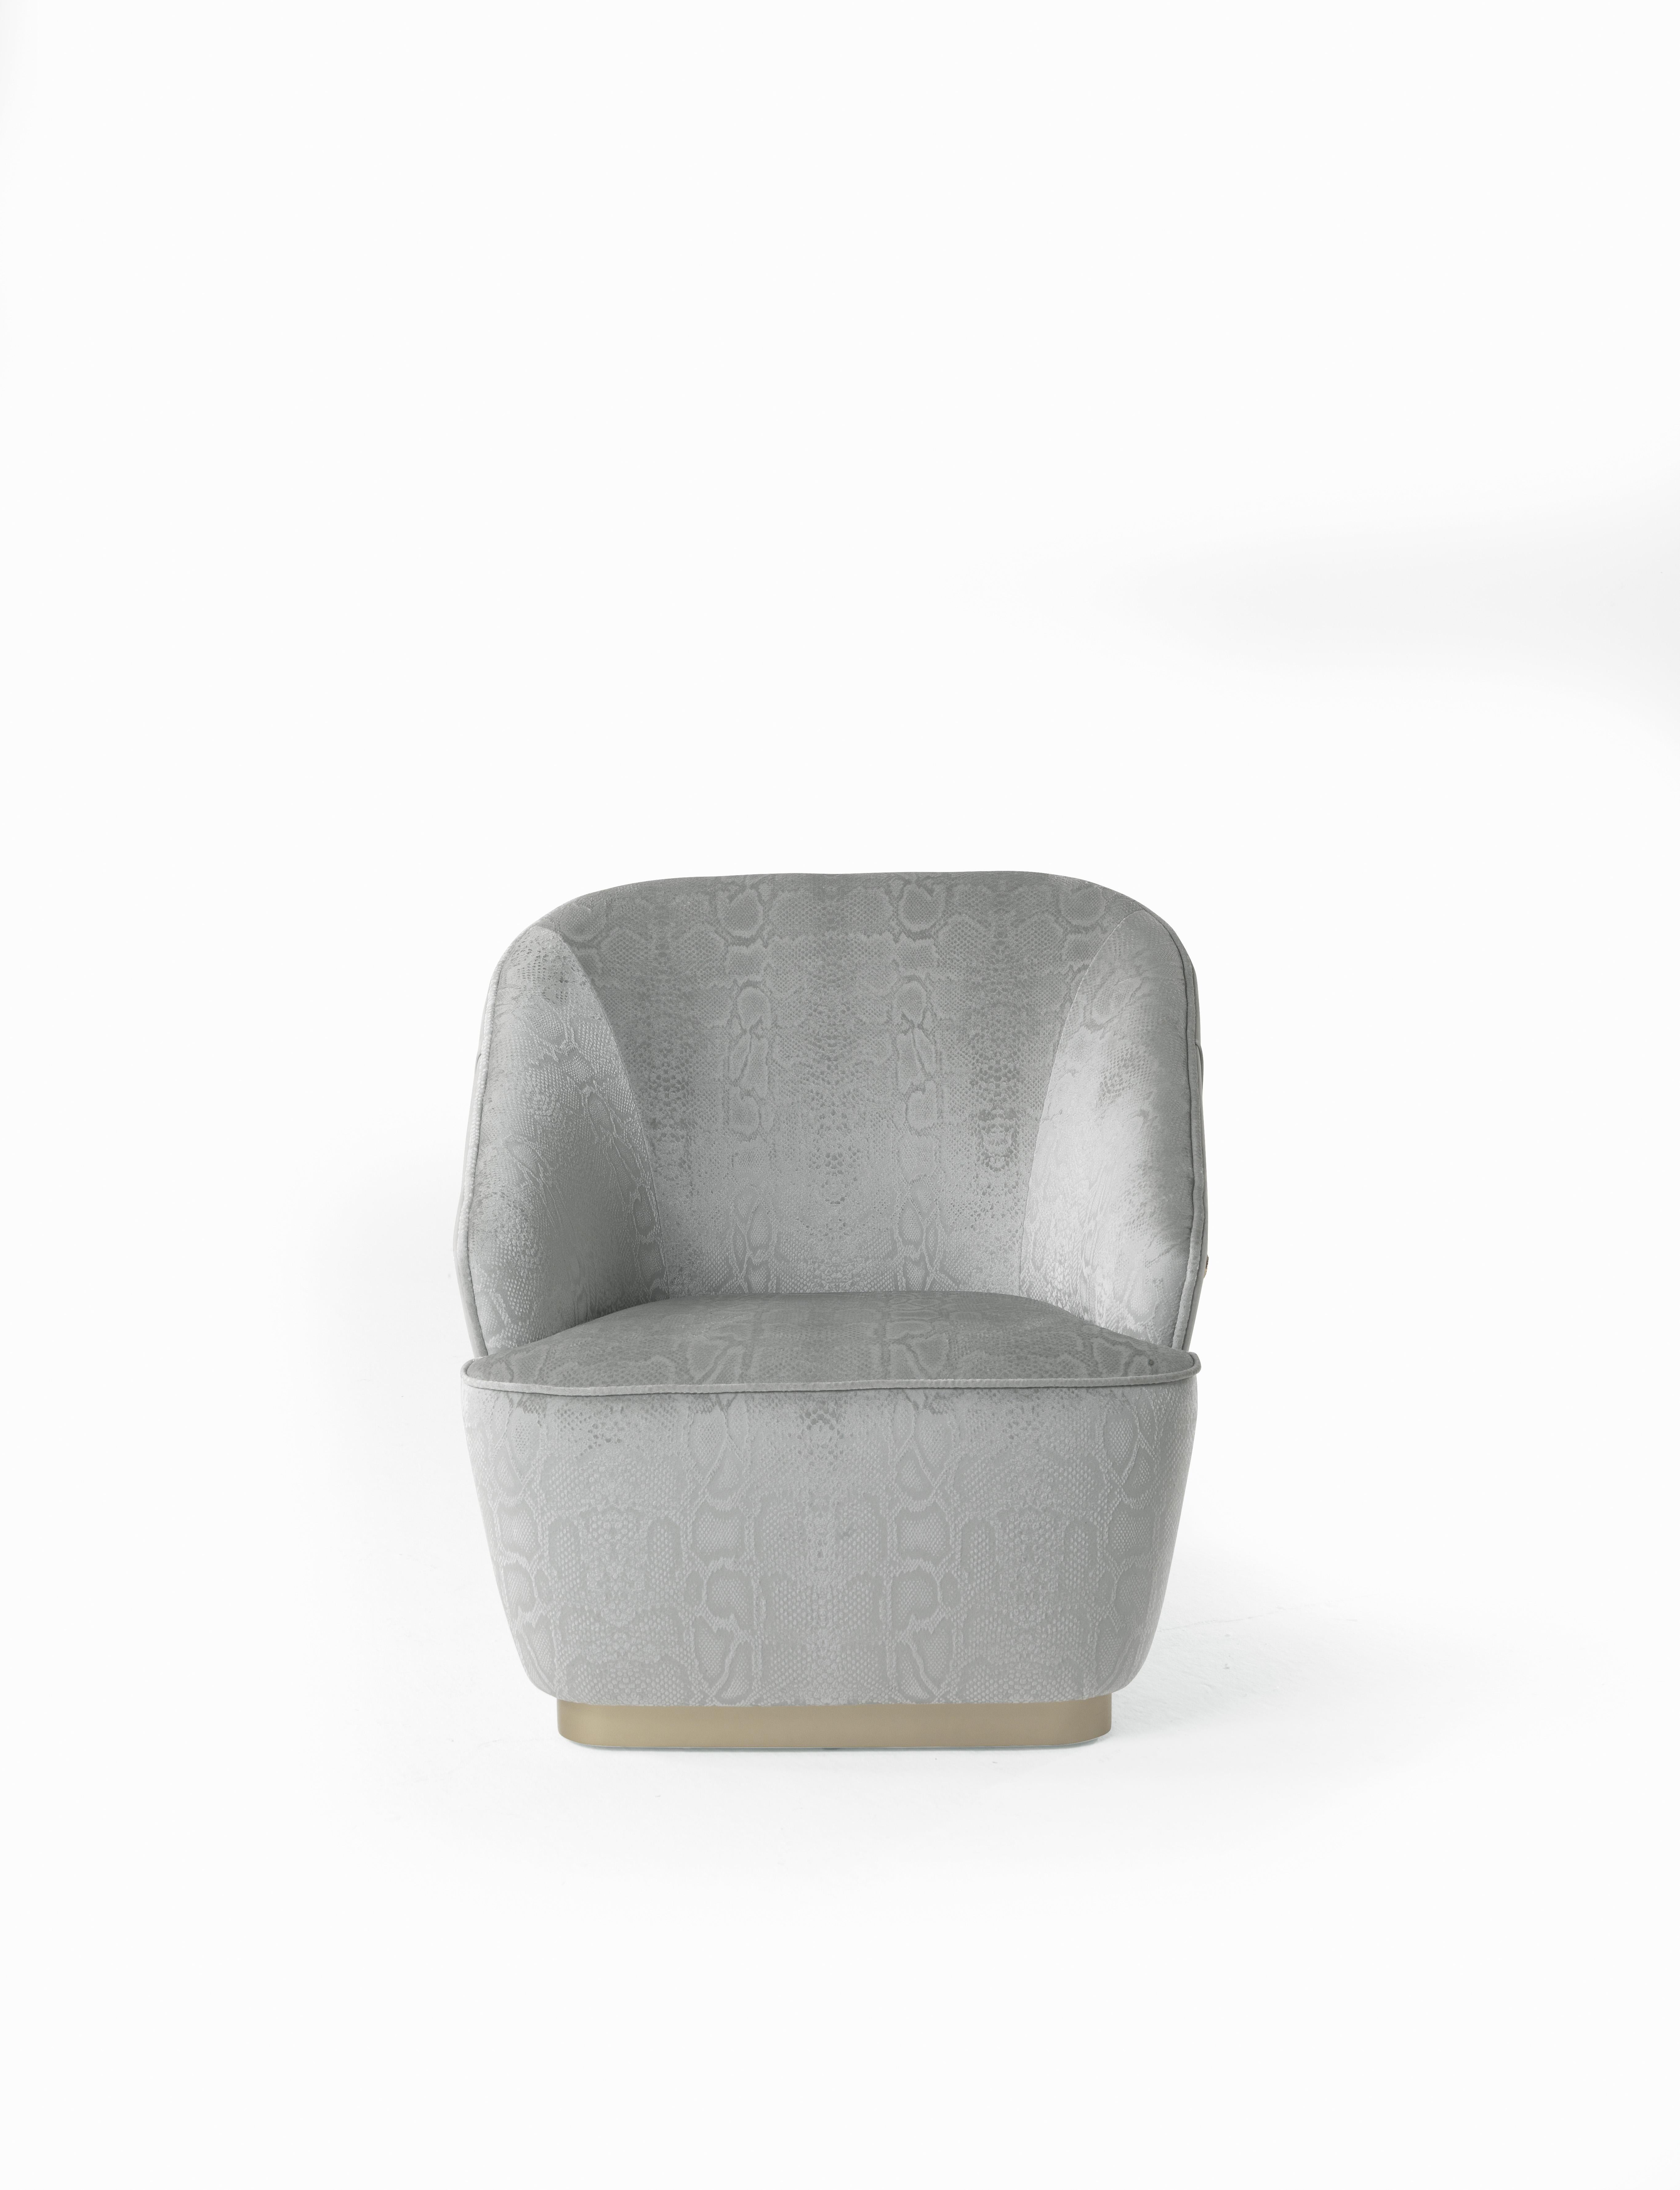 This new little armchair with an appealing design is characterized by an interior upholstered with the new silks from the last Roberto Cavalli collection and a leather exterior embellished with special pleating with metallic piercings, recalling